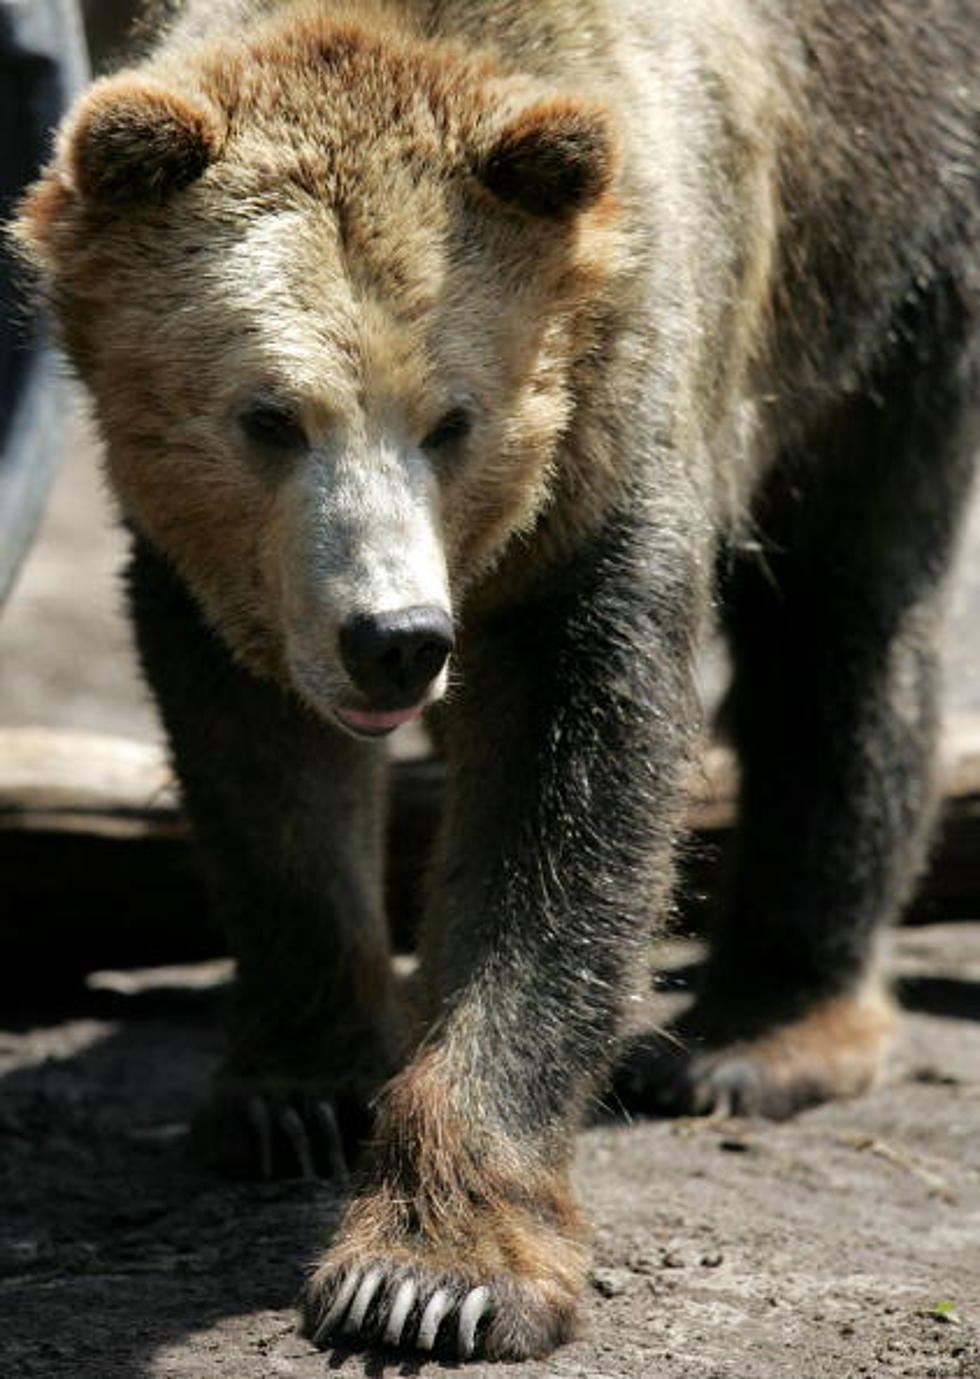 Montana Outfitting Business Sued Over Bear Mauling [Poll]